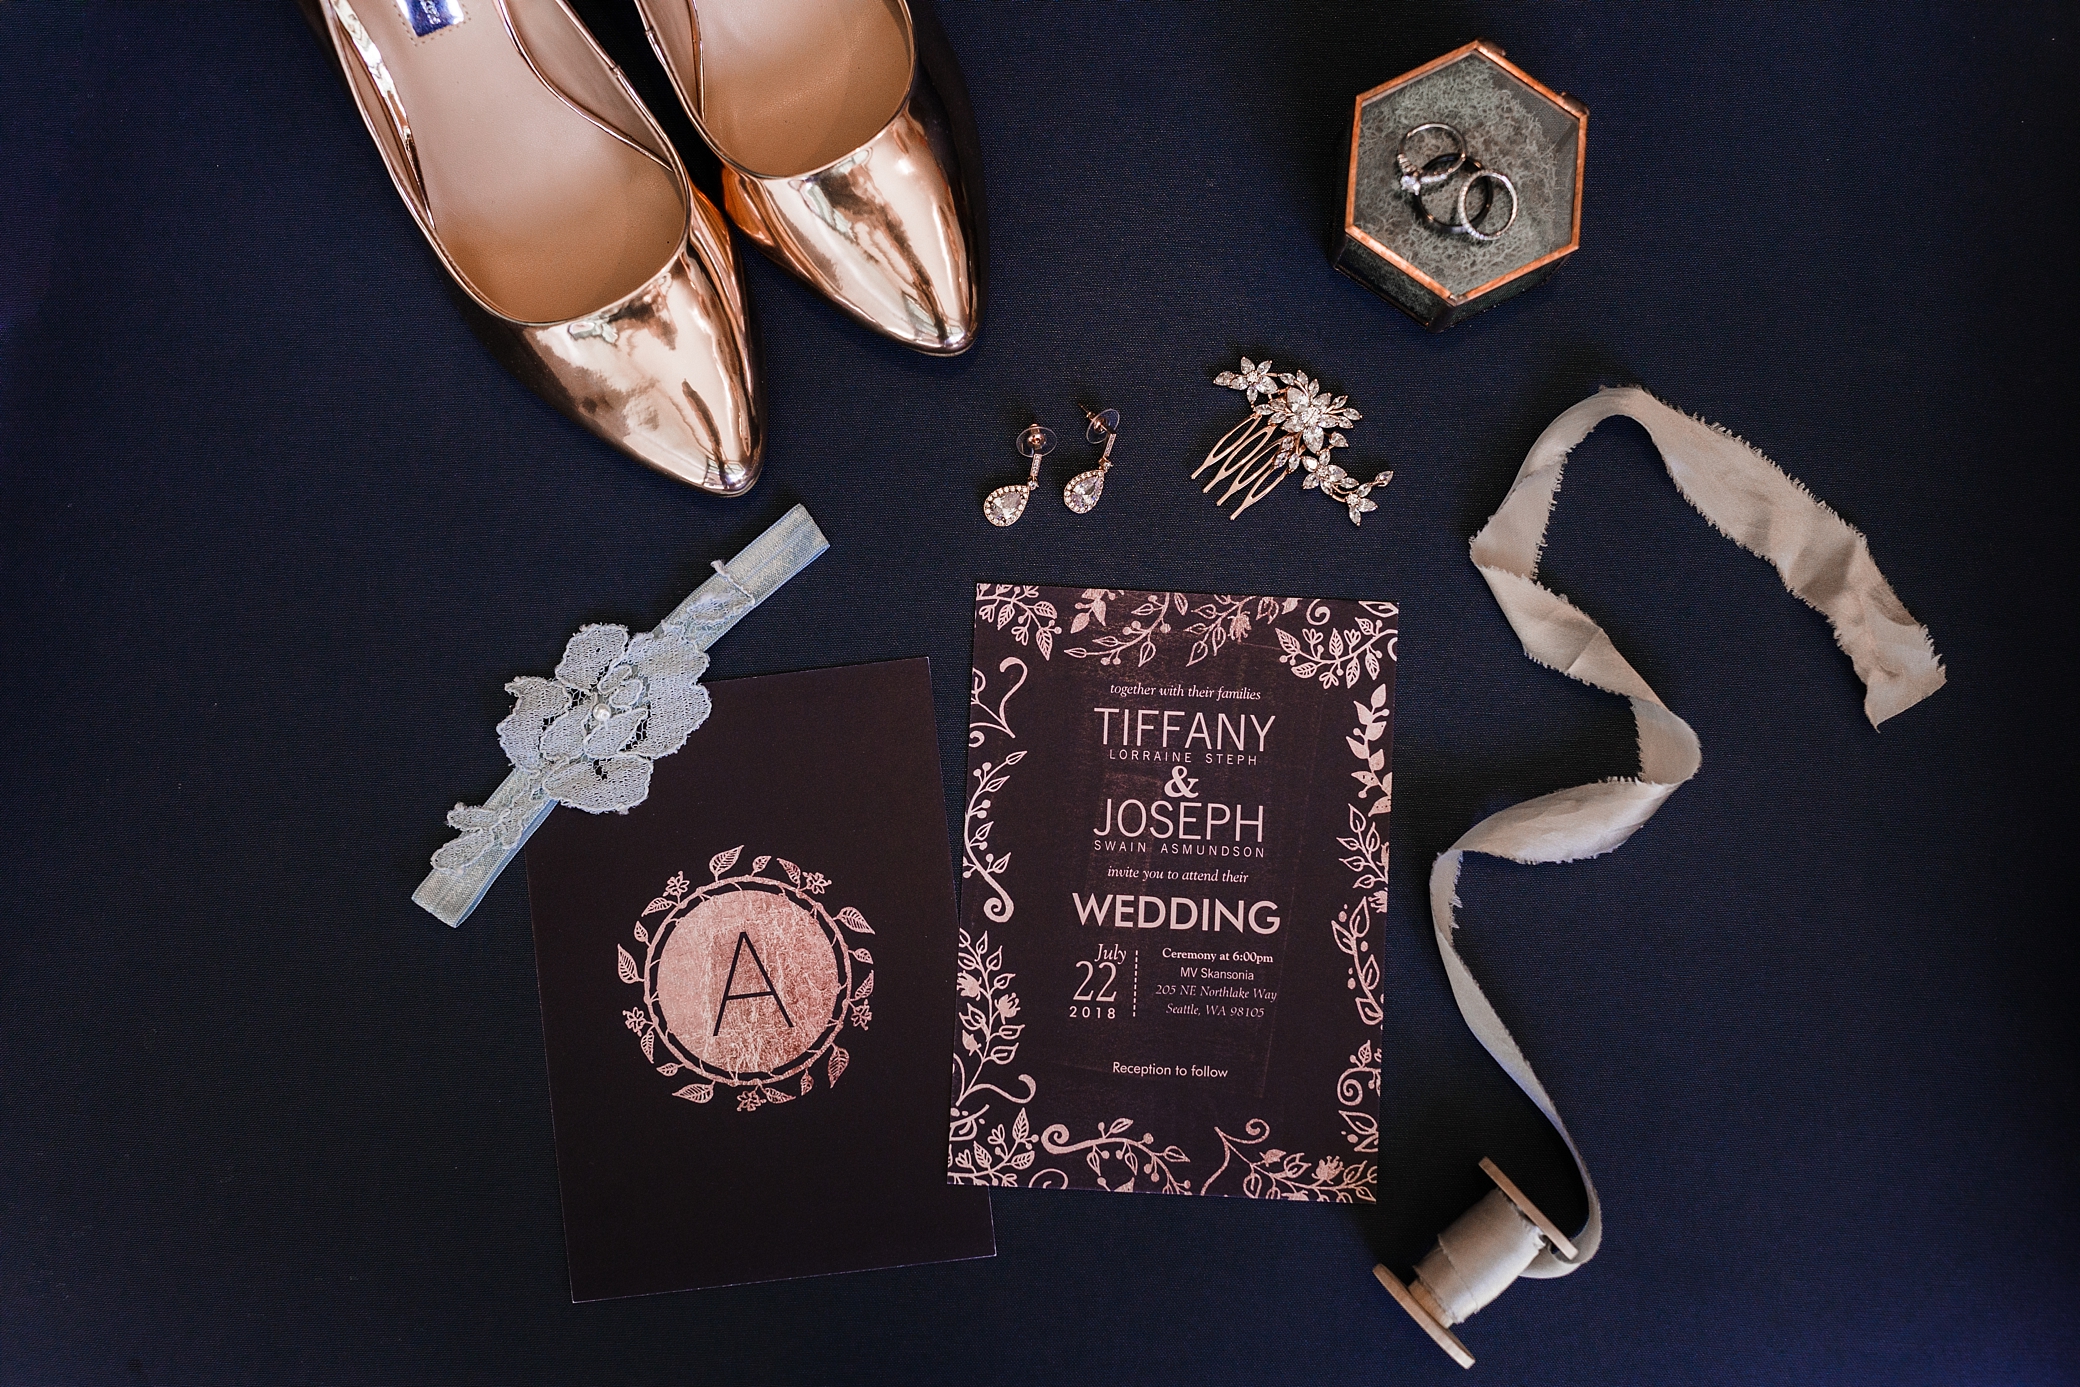 Invitation suite and bridal details photographed by Tacoma Seattle Wedding Photographer, Megan Montalvo Photography 